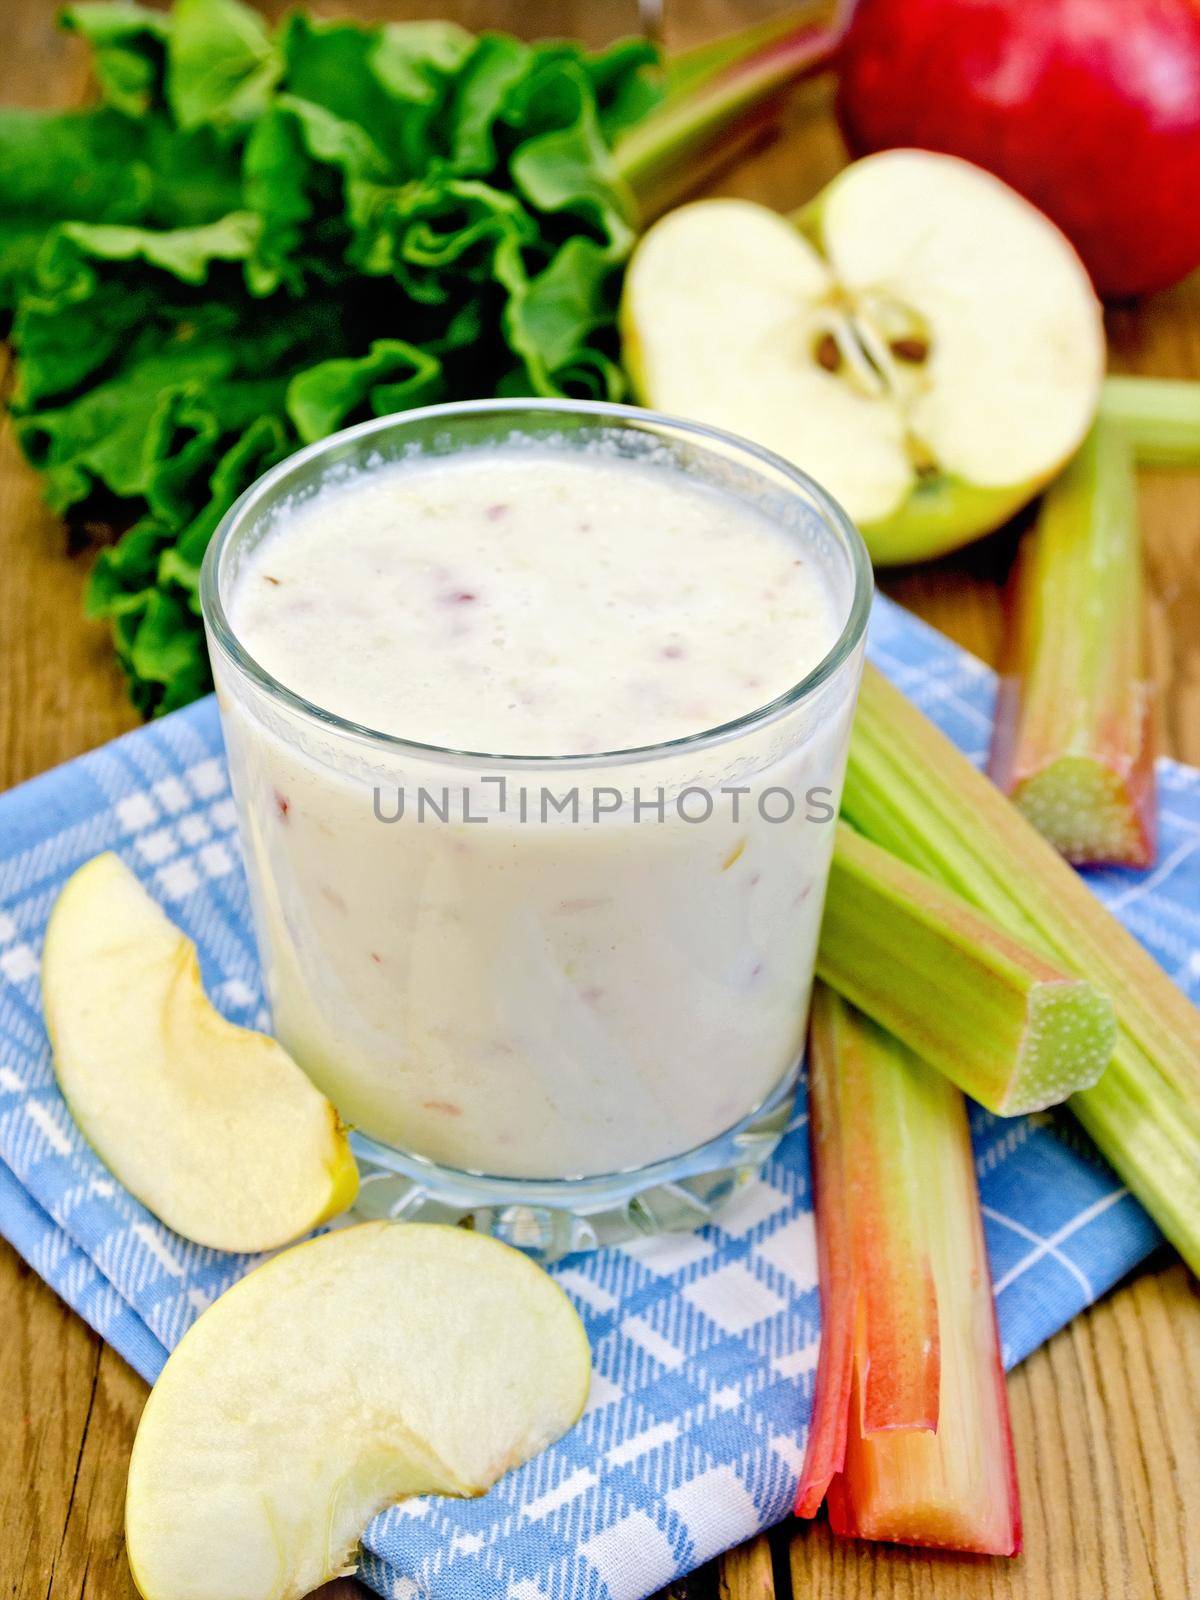 Milkshake with rhubarb and apples on napkin by rezkrr